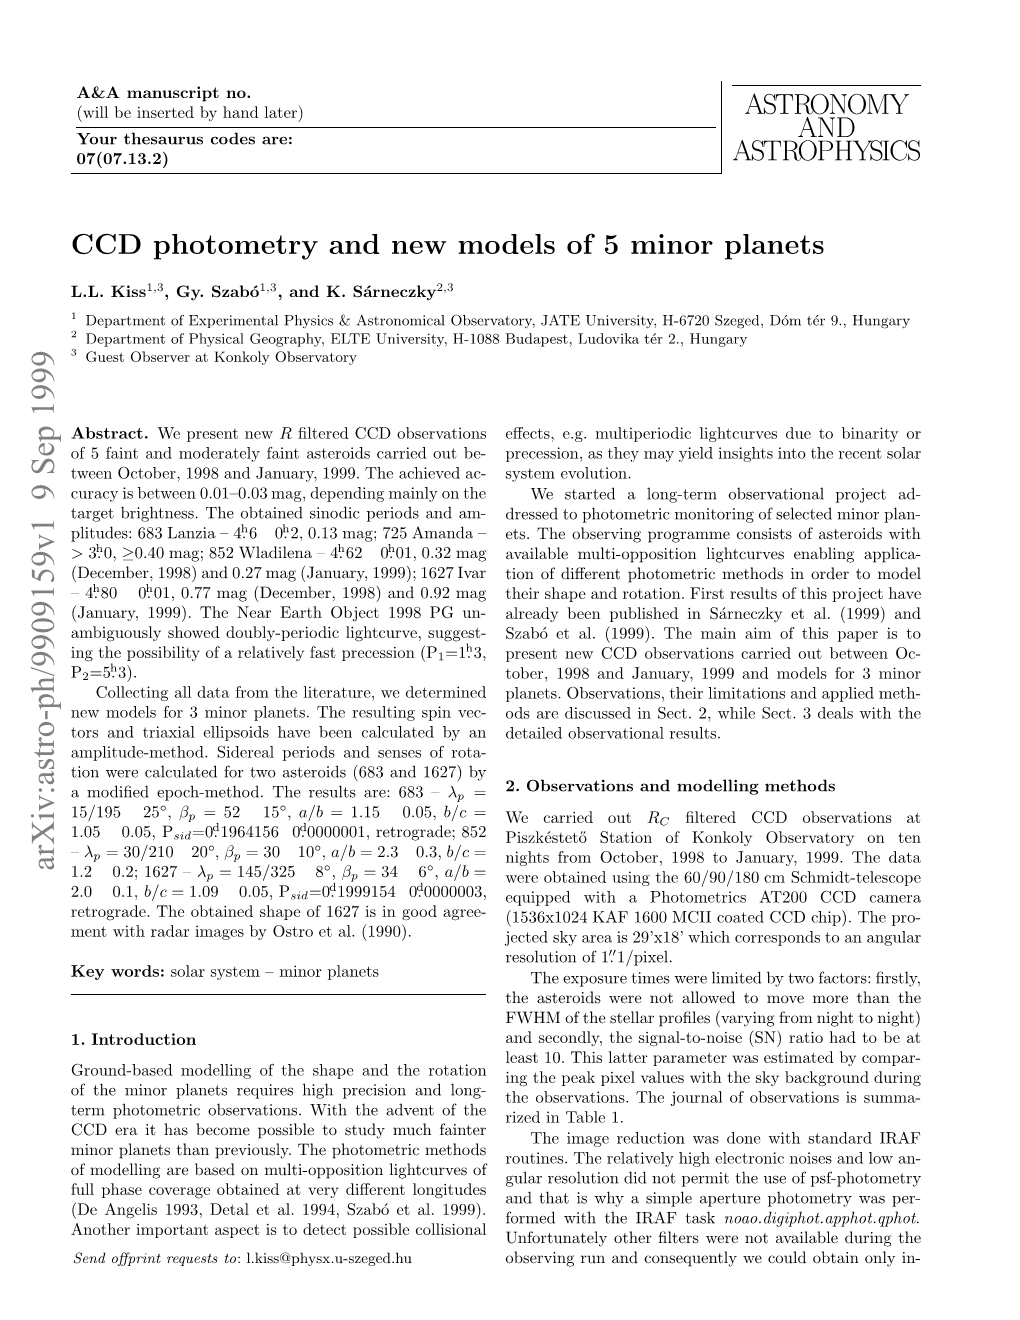 CCD Photometry and New Models of 5 Minor Planets